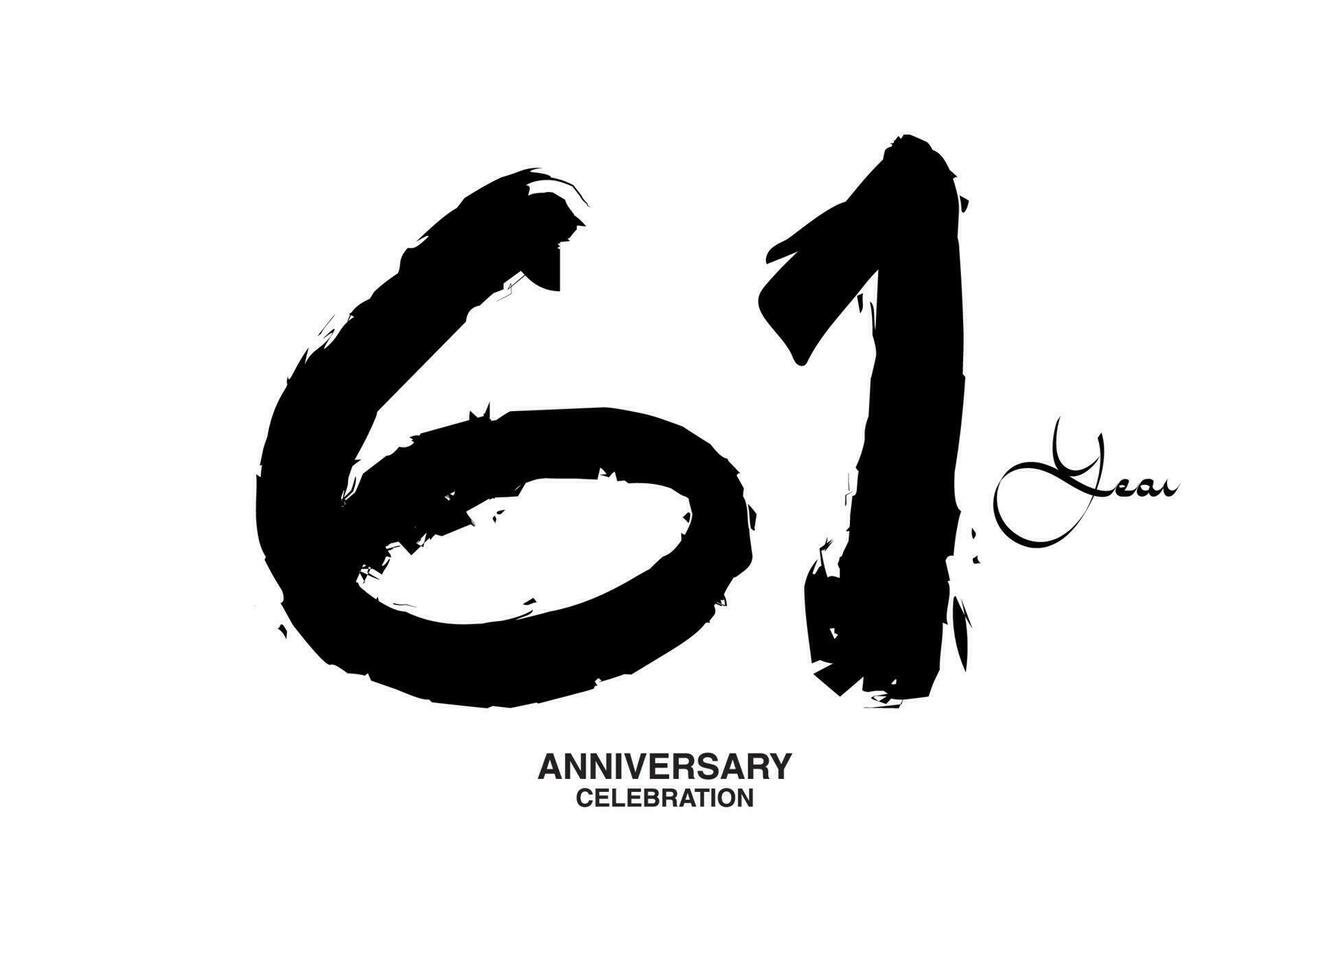 61 Years Anniversary Celebration Vector Template, 61 number logo design, 61th birthday, Black Lettering Numbers brush drawing hand drawn sketch, black number, Anniversary vector illustration